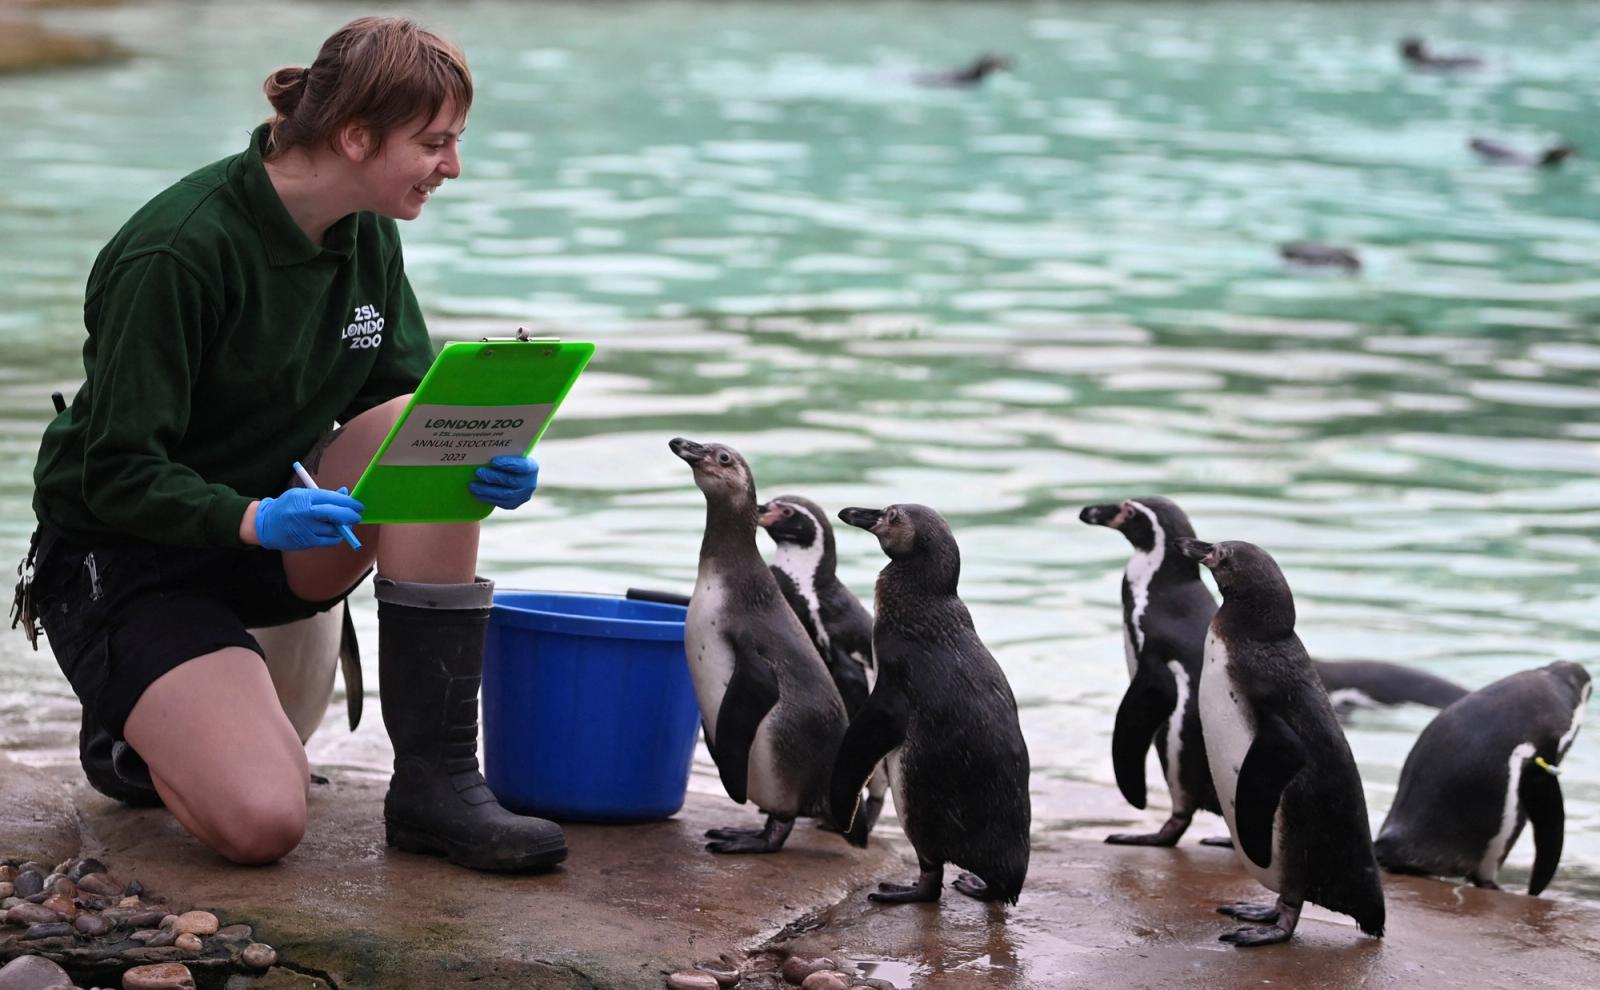 Keeper Jessica Ray poses with a clipboard amongst Humboldt penguins during the annual stocktake at ZSL London Zoo in London, Britain.